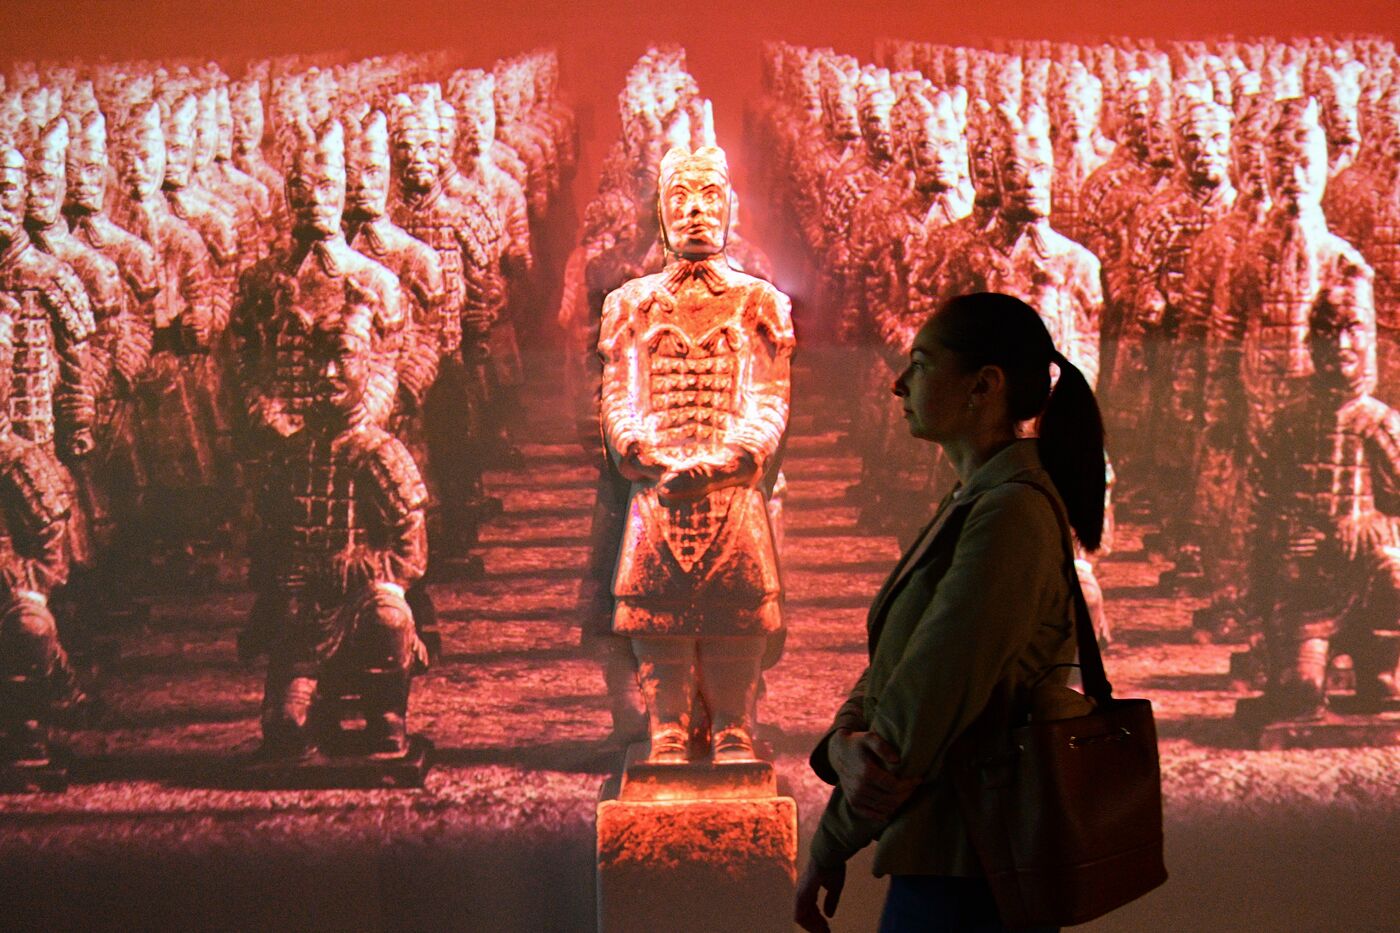 SPIEF-2023. The Terracotta Army. China’s Immortal Warriors Exhibition